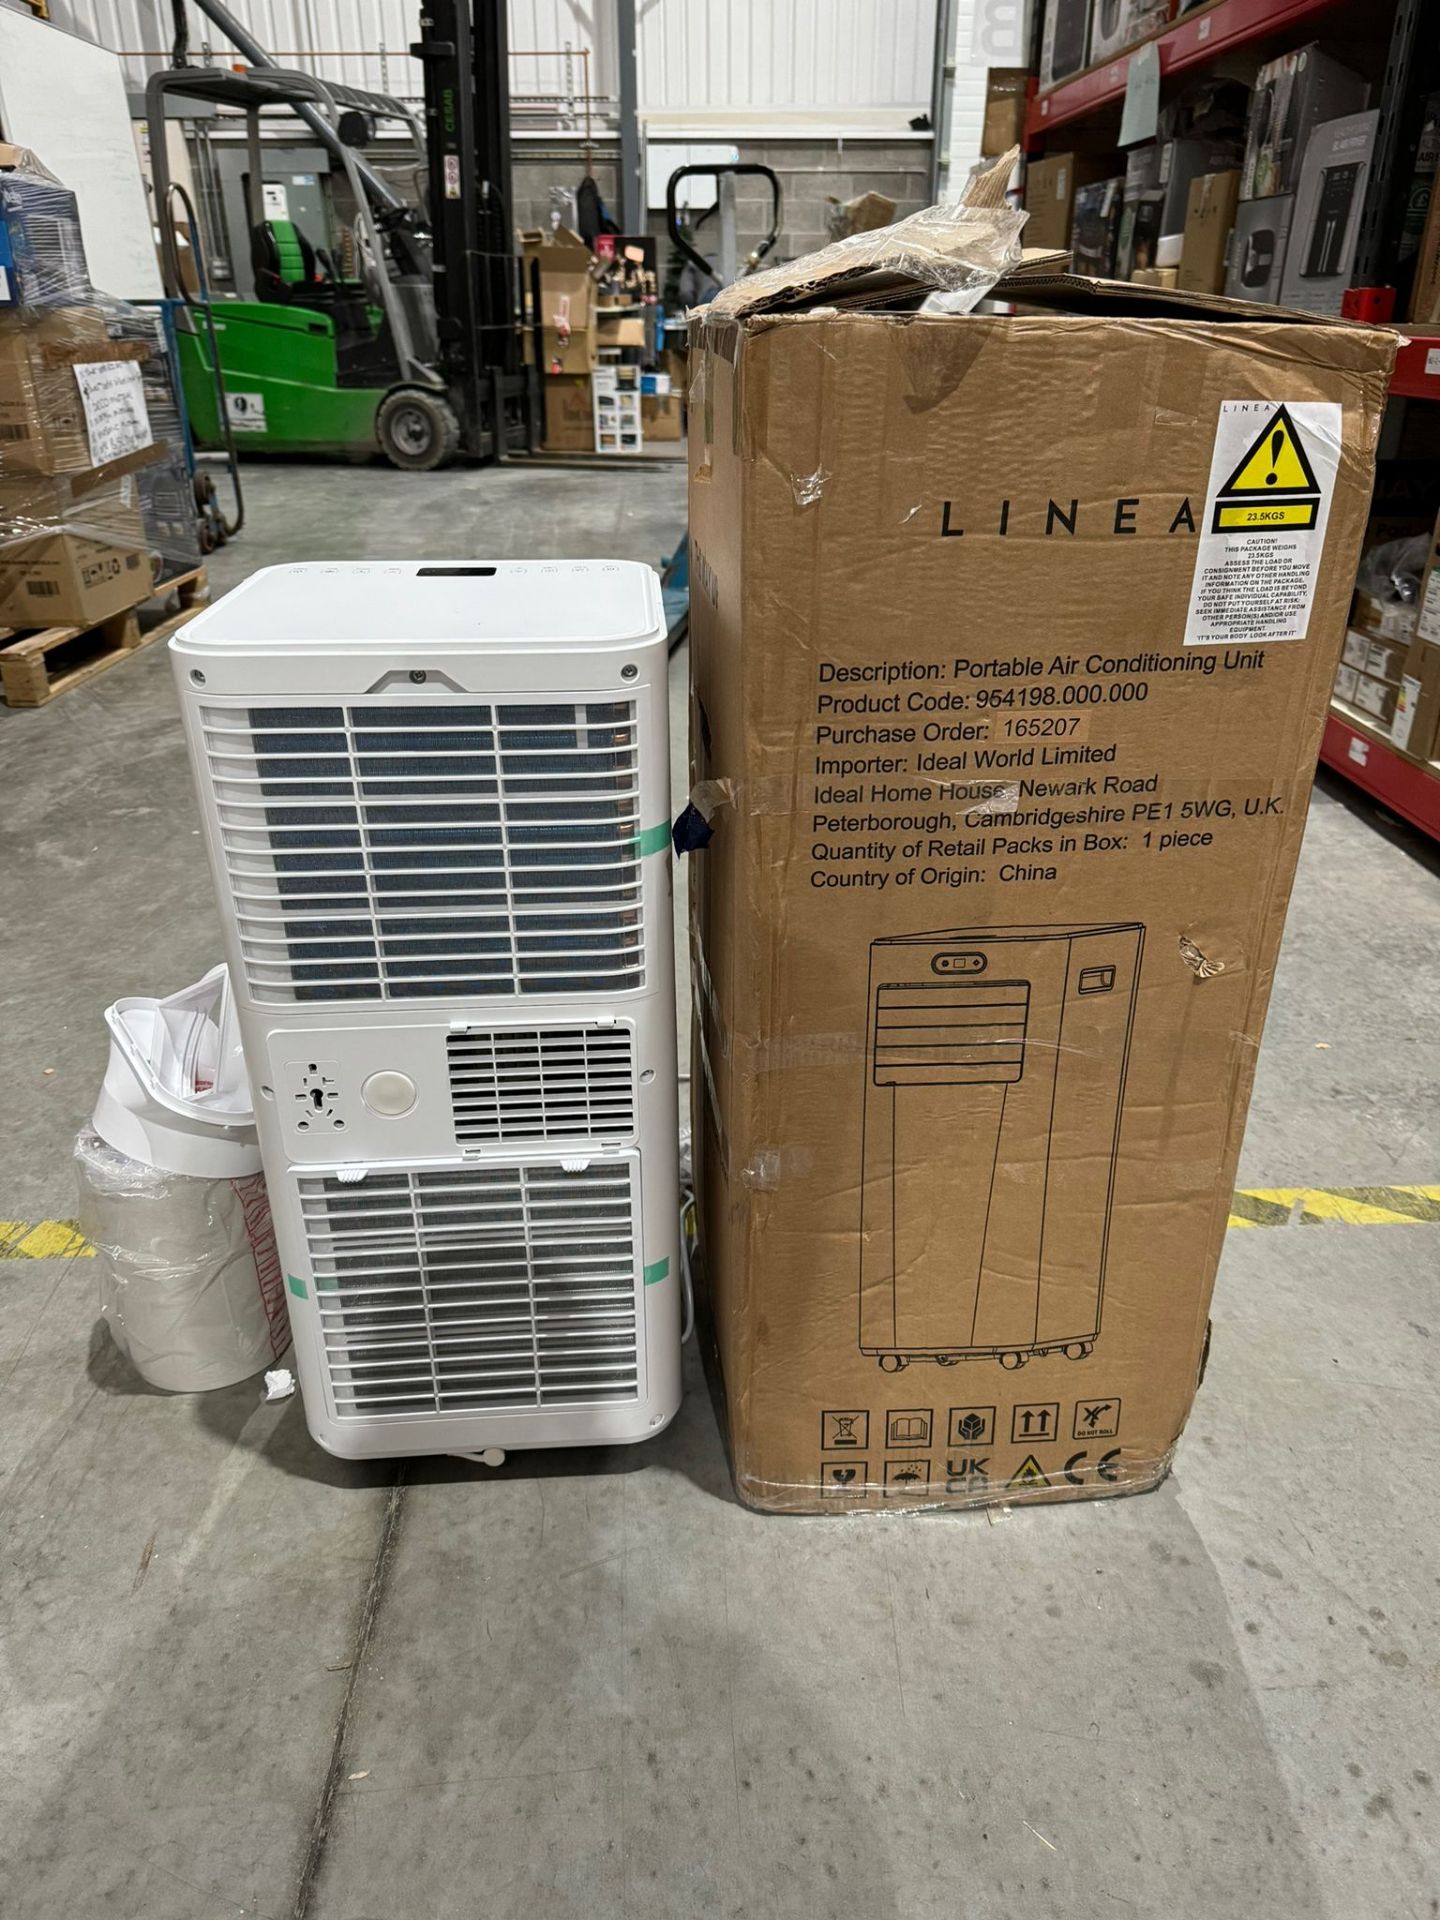 1 x LINEA Portable Air Conditioning Unit - 954198.000.000 with Window Kit - NO RESERVE - Image 7 of 8